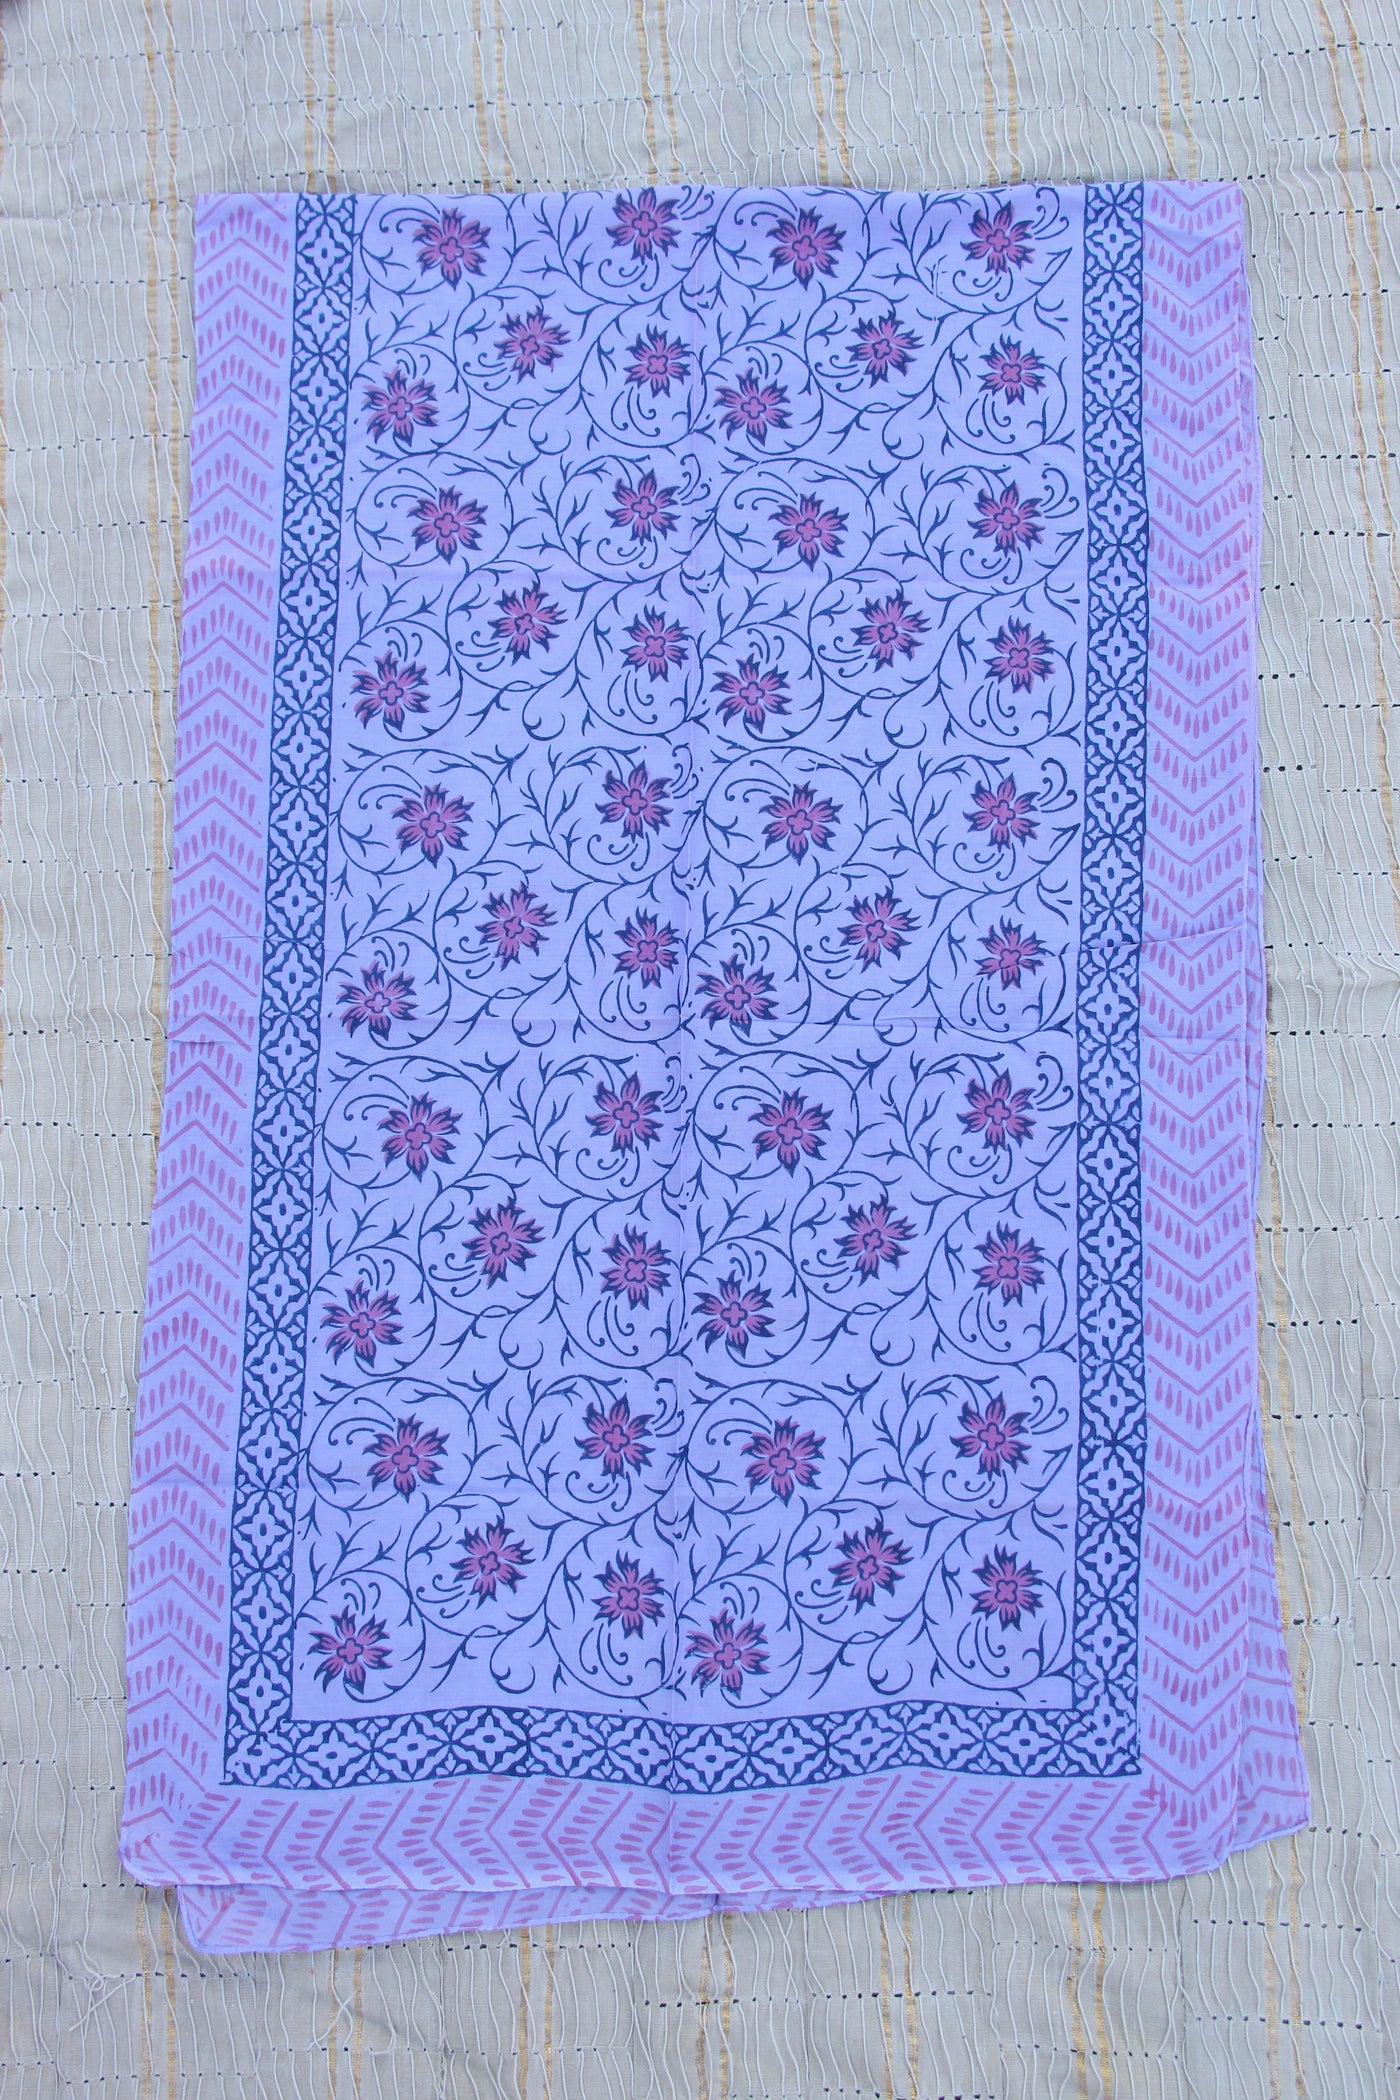 Periwinkle Hand Block Print Scarf, Cotton, from India